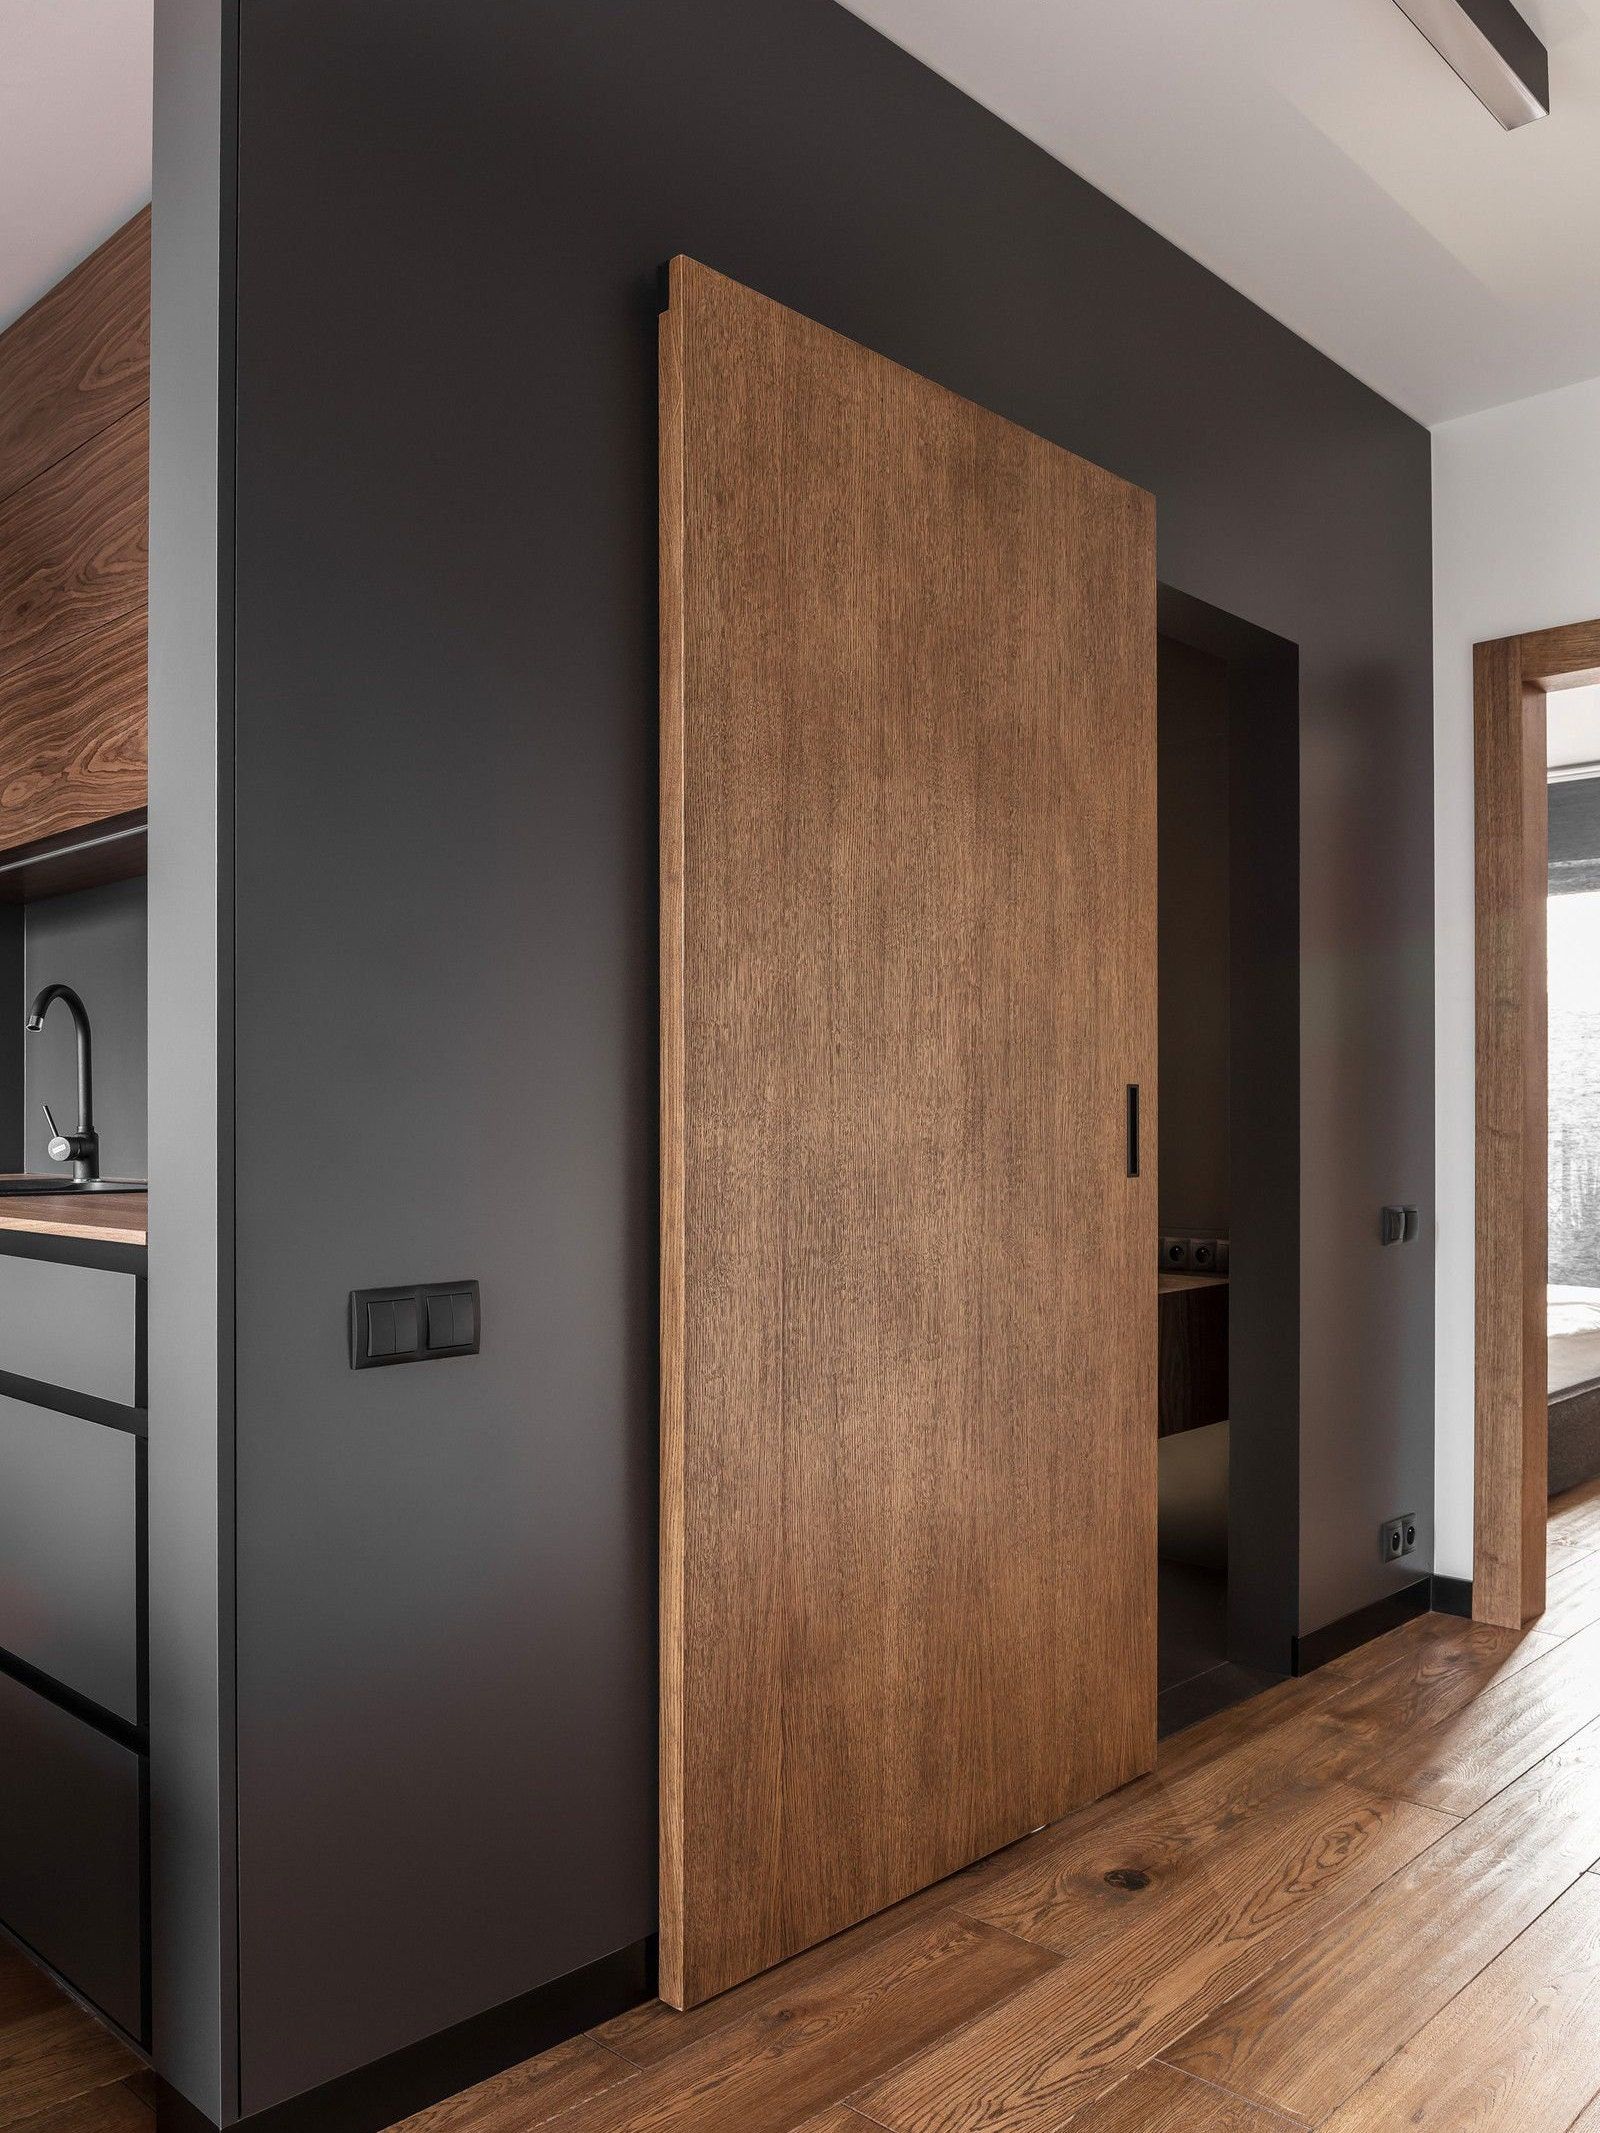 Wood Sliding Closet Doors: A Stylish and Functional Storage Solution